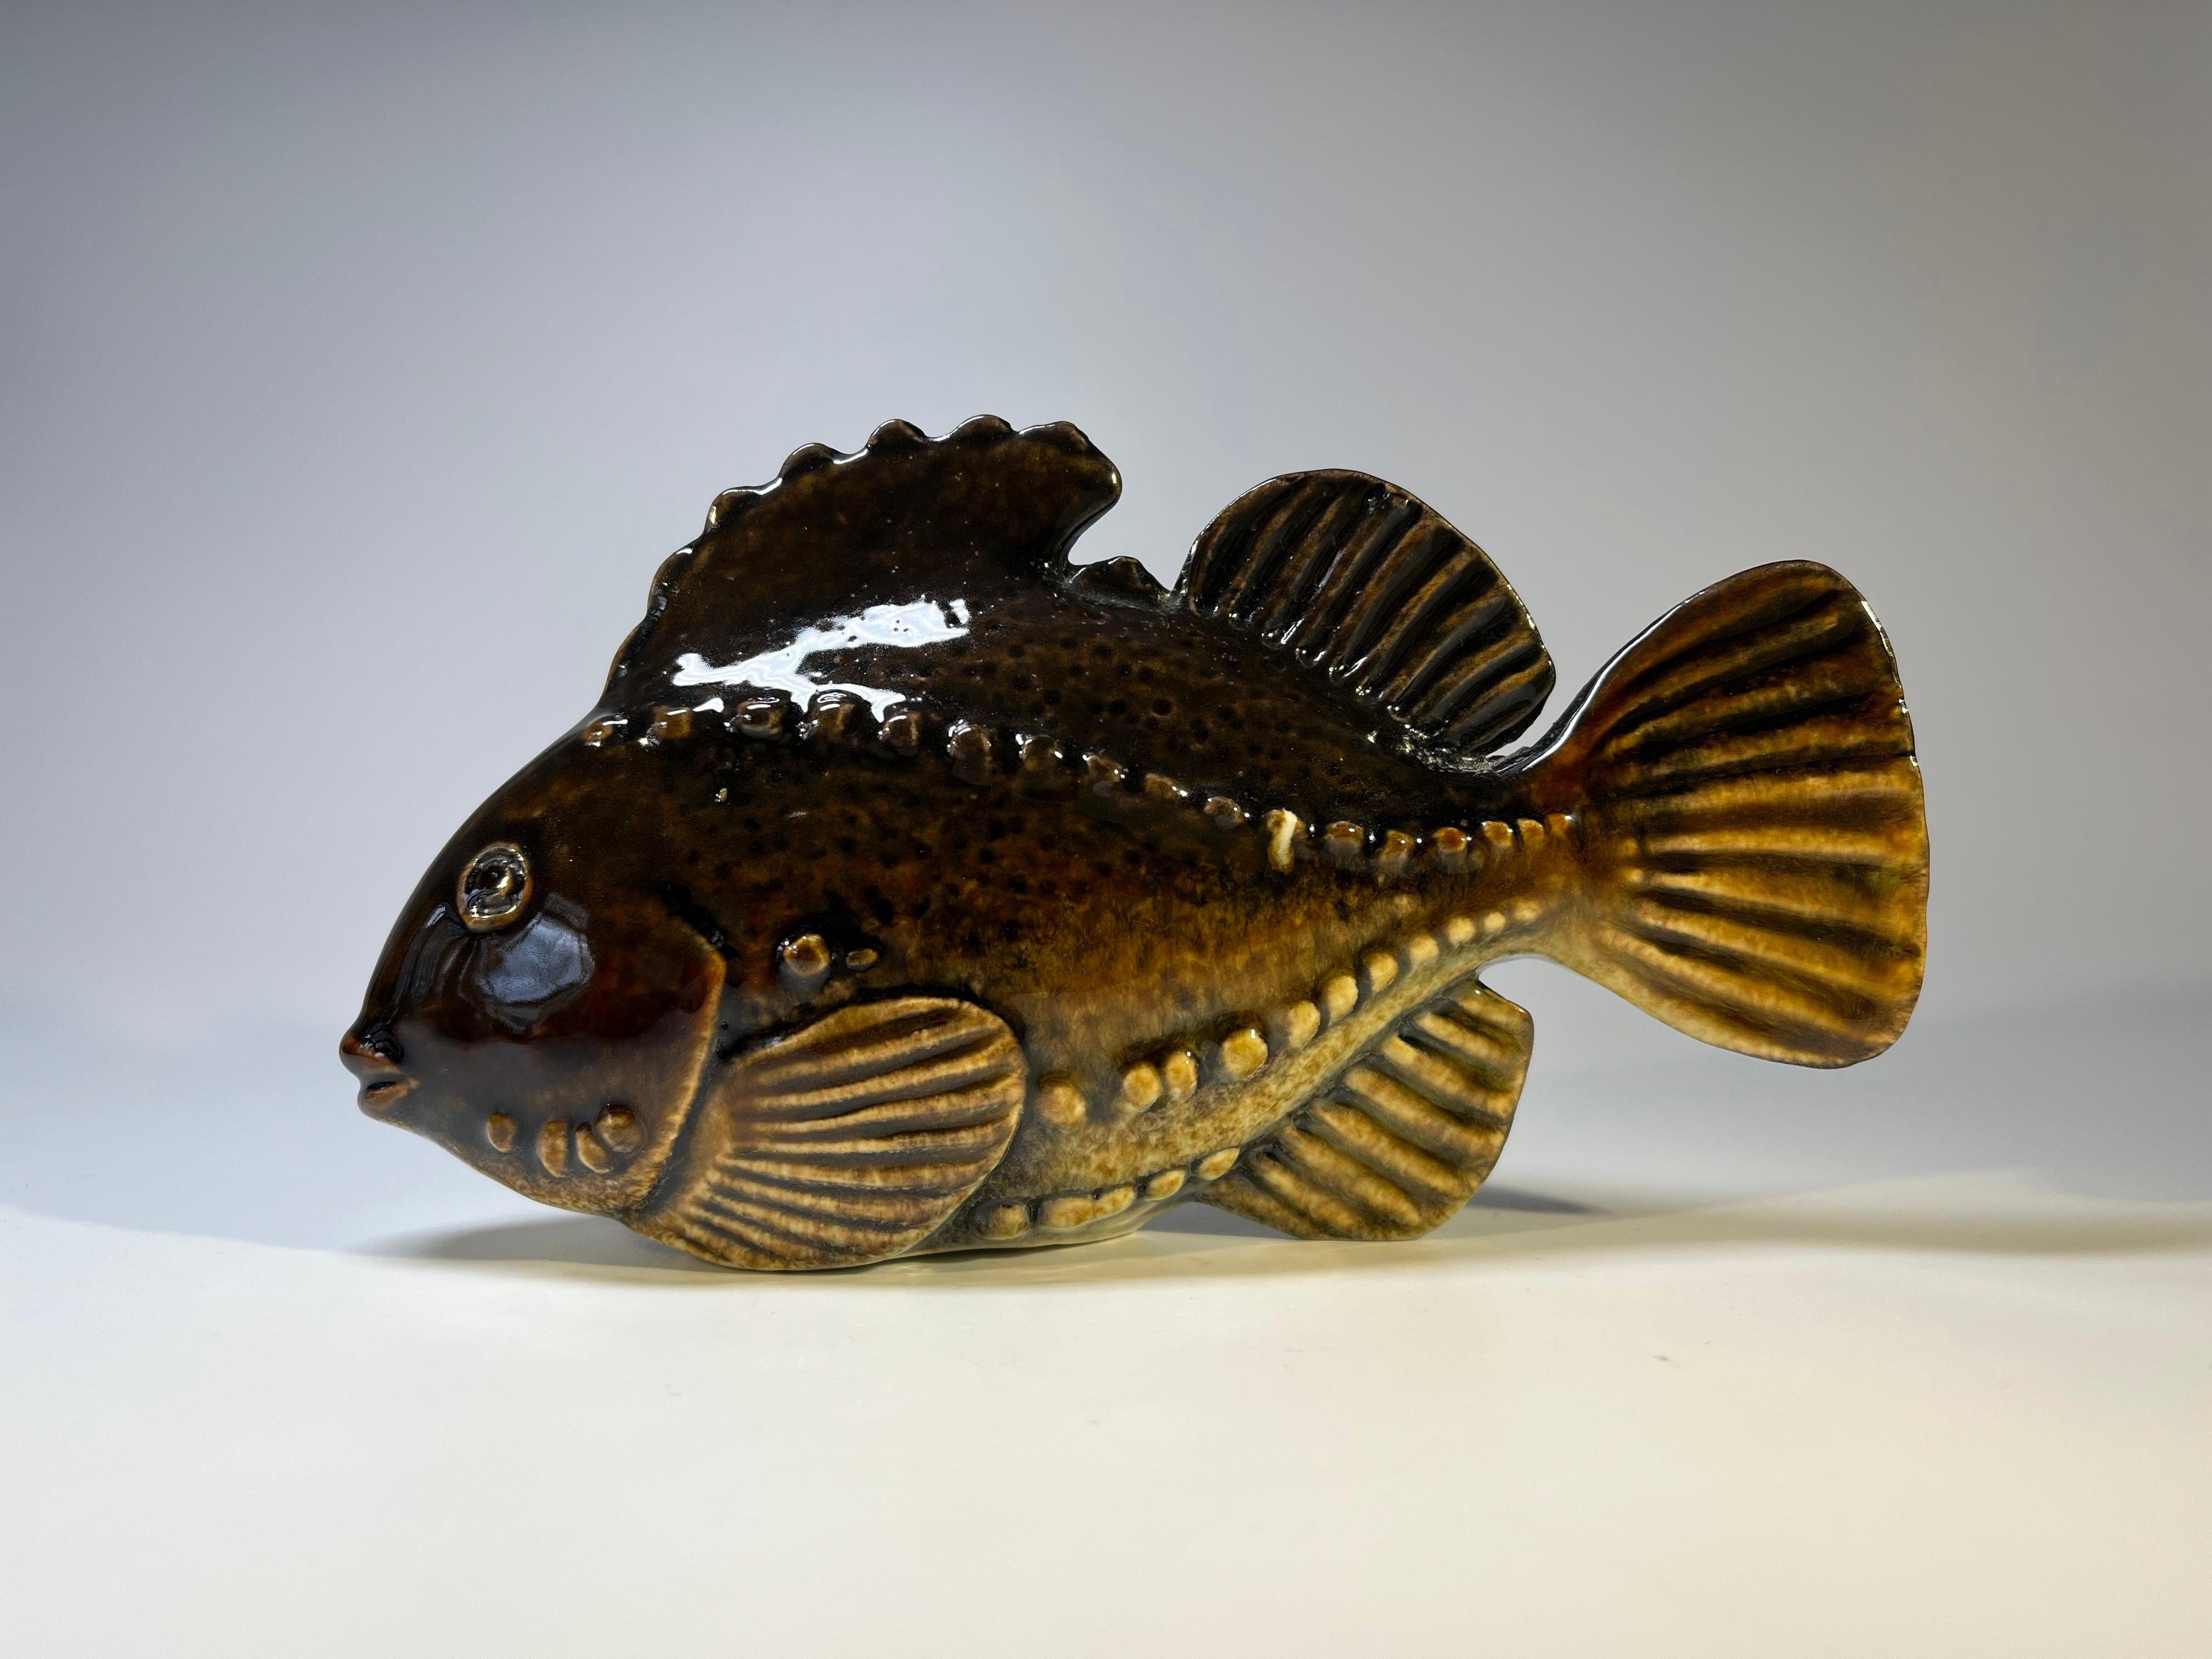 Beautifully glazed stoneware fish figure by Sven Wejsfelt for Gustavsberg, Sweden. Circa 1980's
Rich dark brown glaze
Original Gustavsberg Anchor label attached
Height 3.5 inch, Length 6.5 inch, Width 1.5 inch.
In very good condition.
 